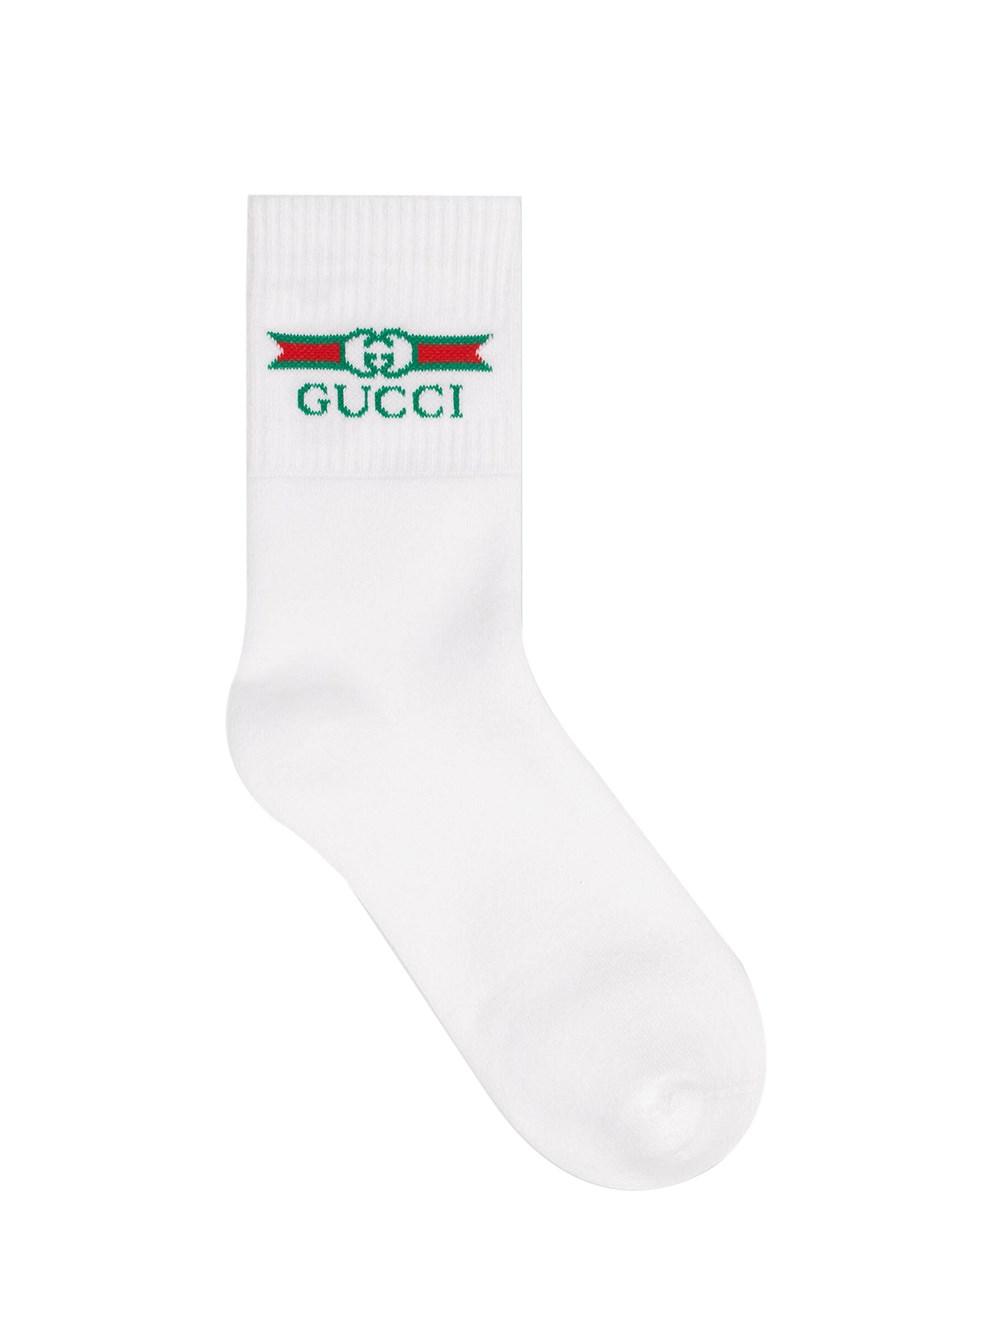 Gucci Cotton Fake Logo Sock in White for Men - Lyst